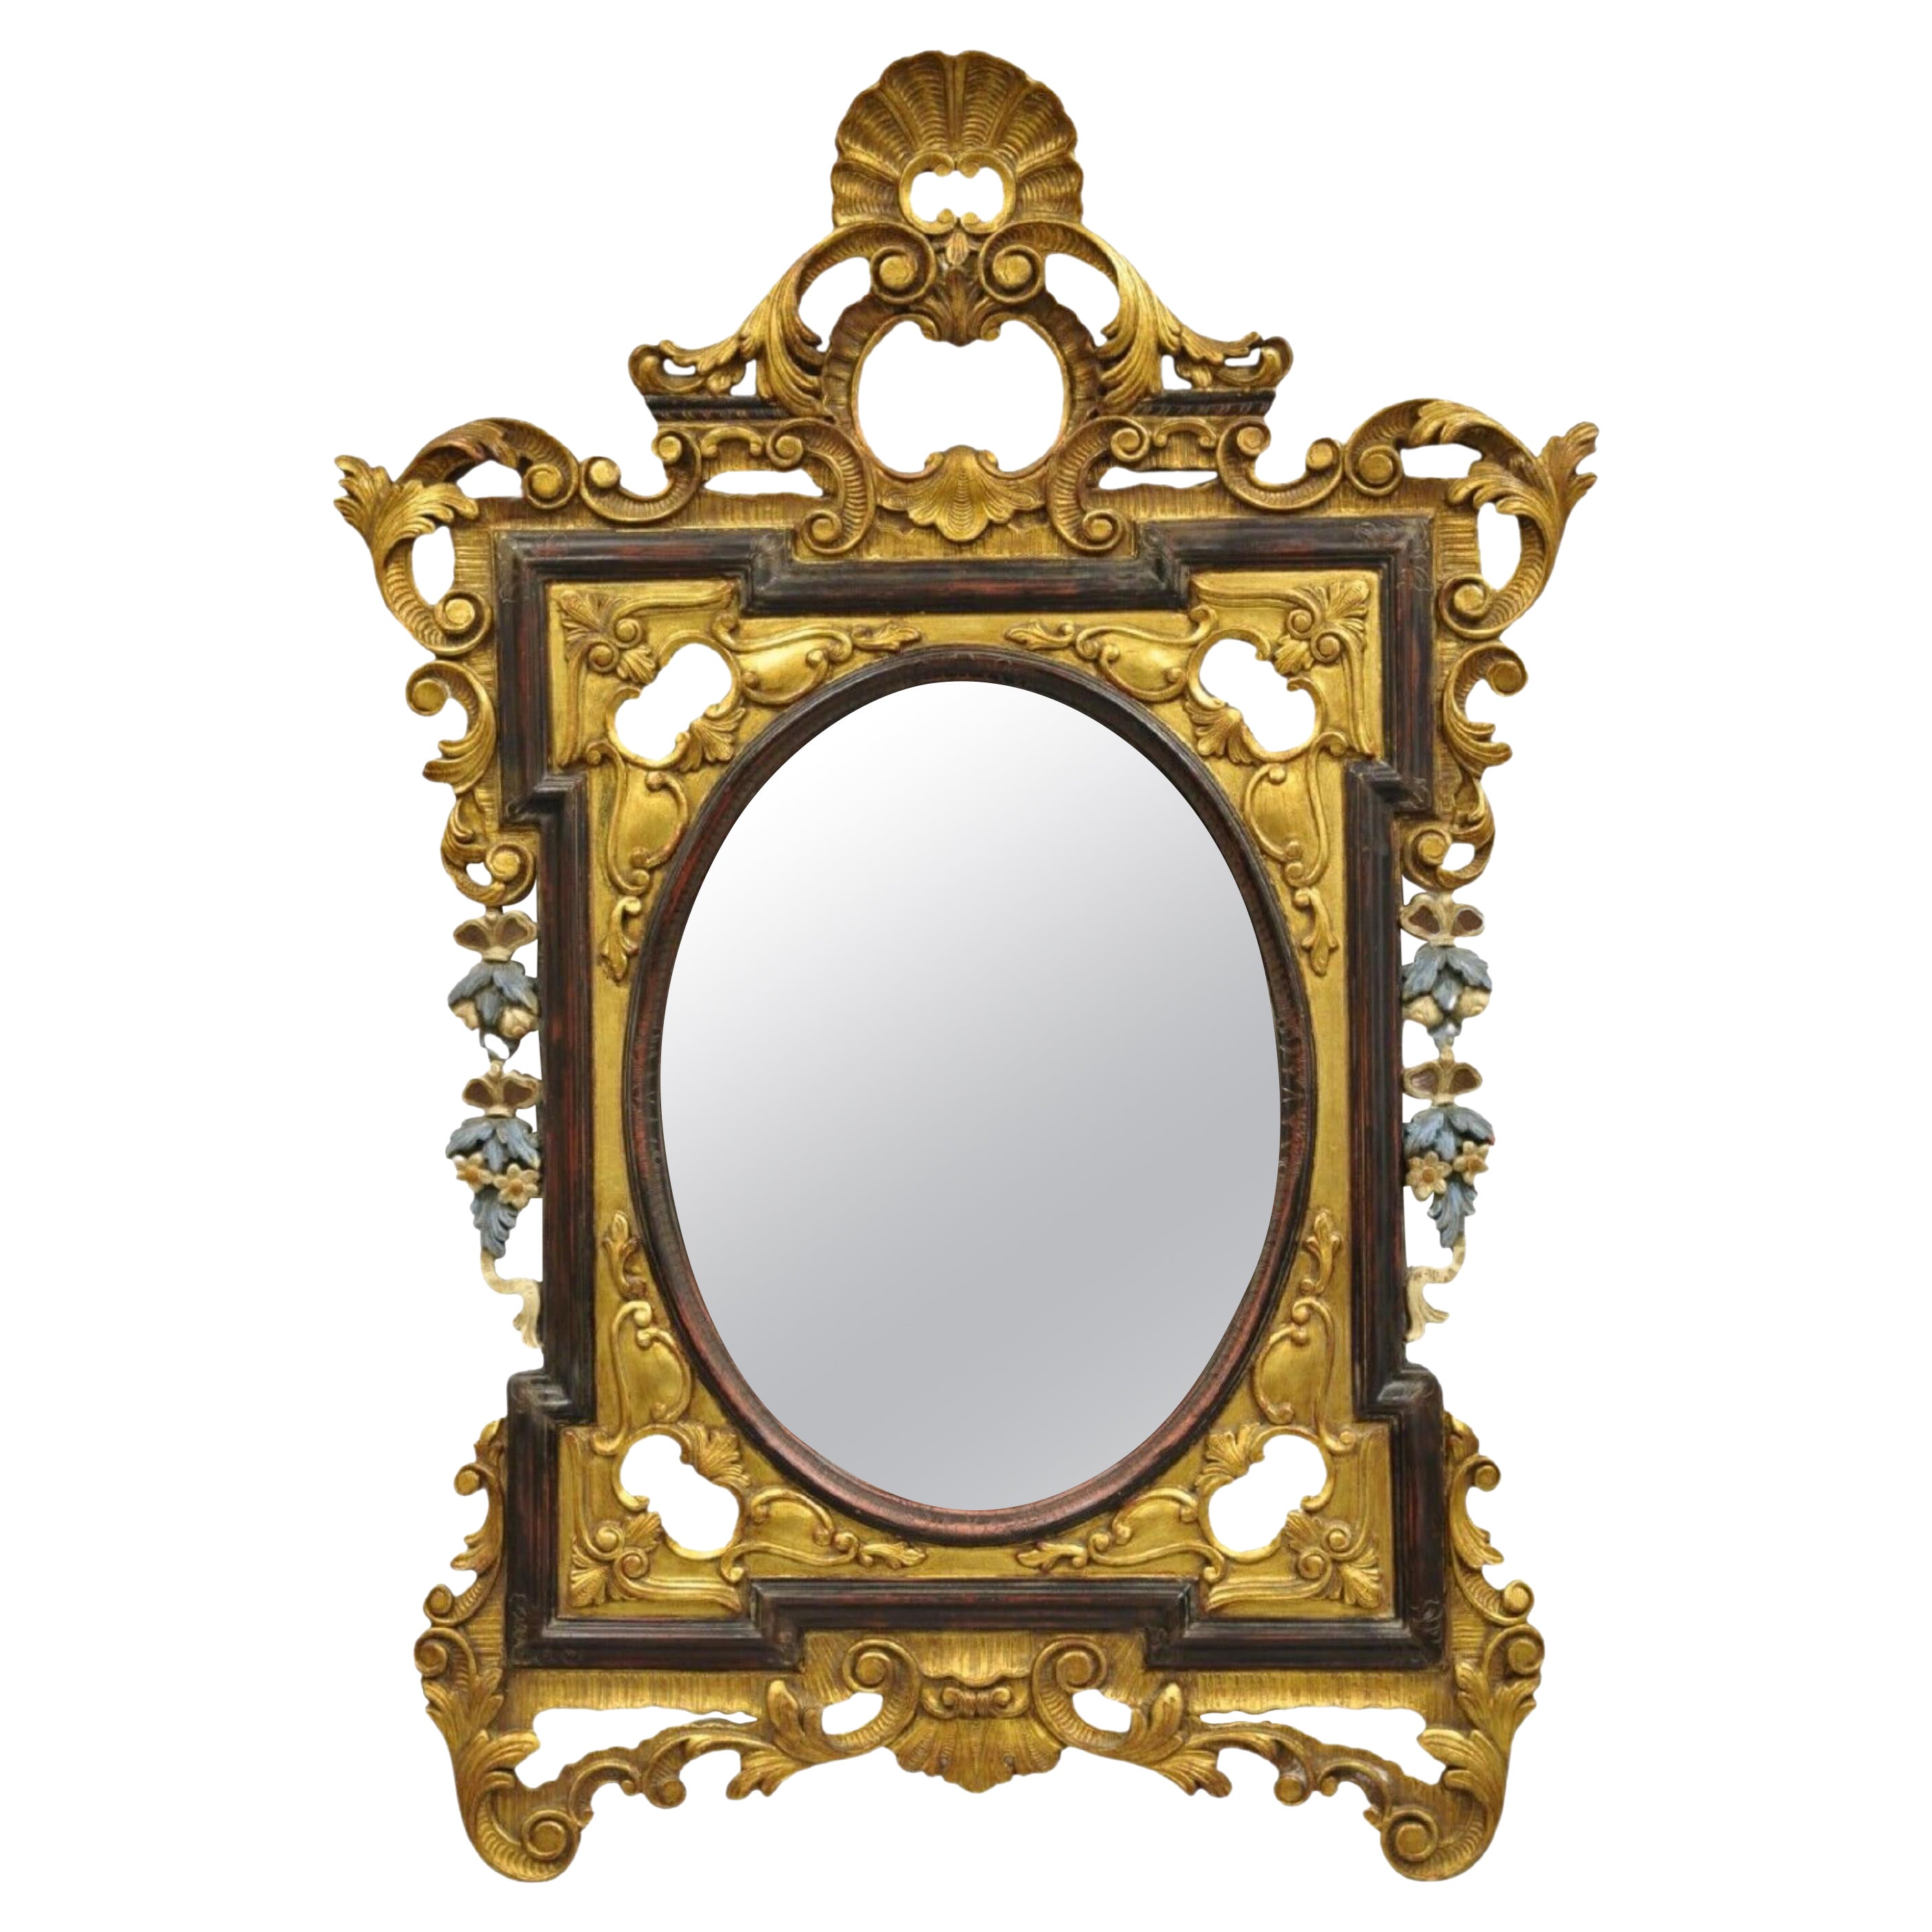 Vintage French Rococo Style Gold Gilt Scroll Carved Wood Italian Wall Mirror For Sale